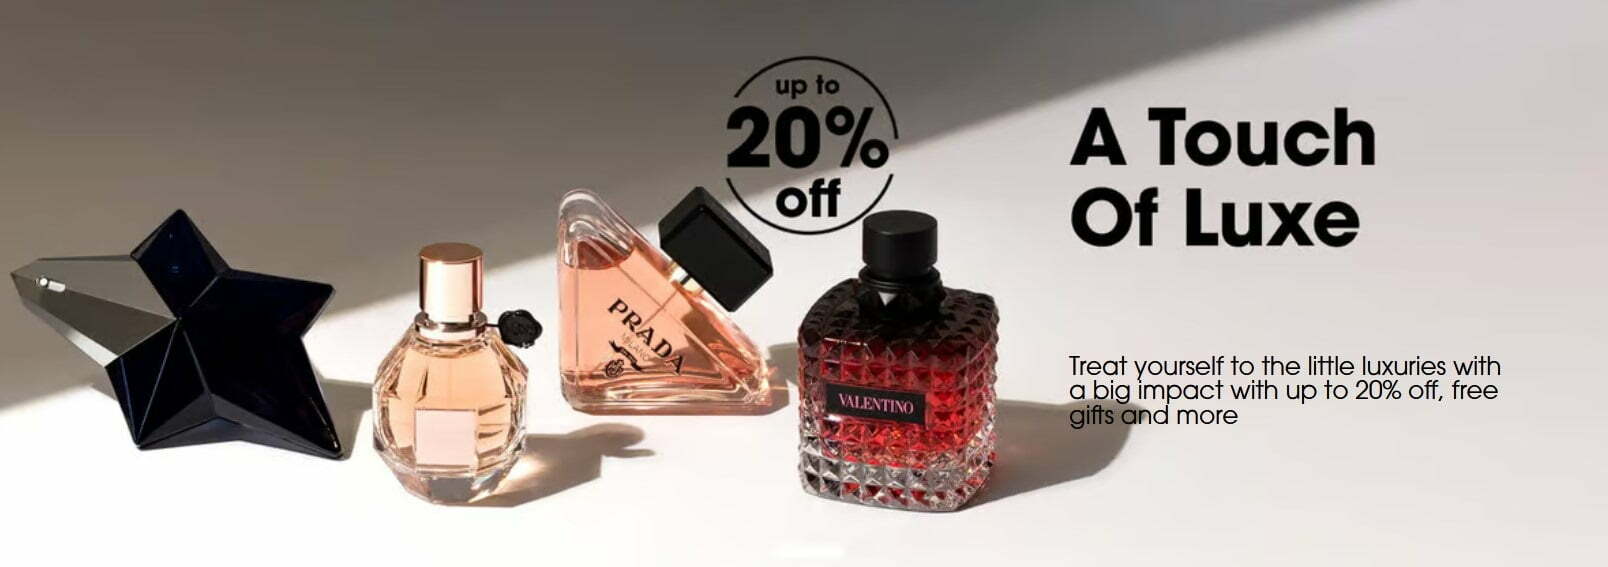 Up to 20% off Luxury Beauty Brands at Sephora UK